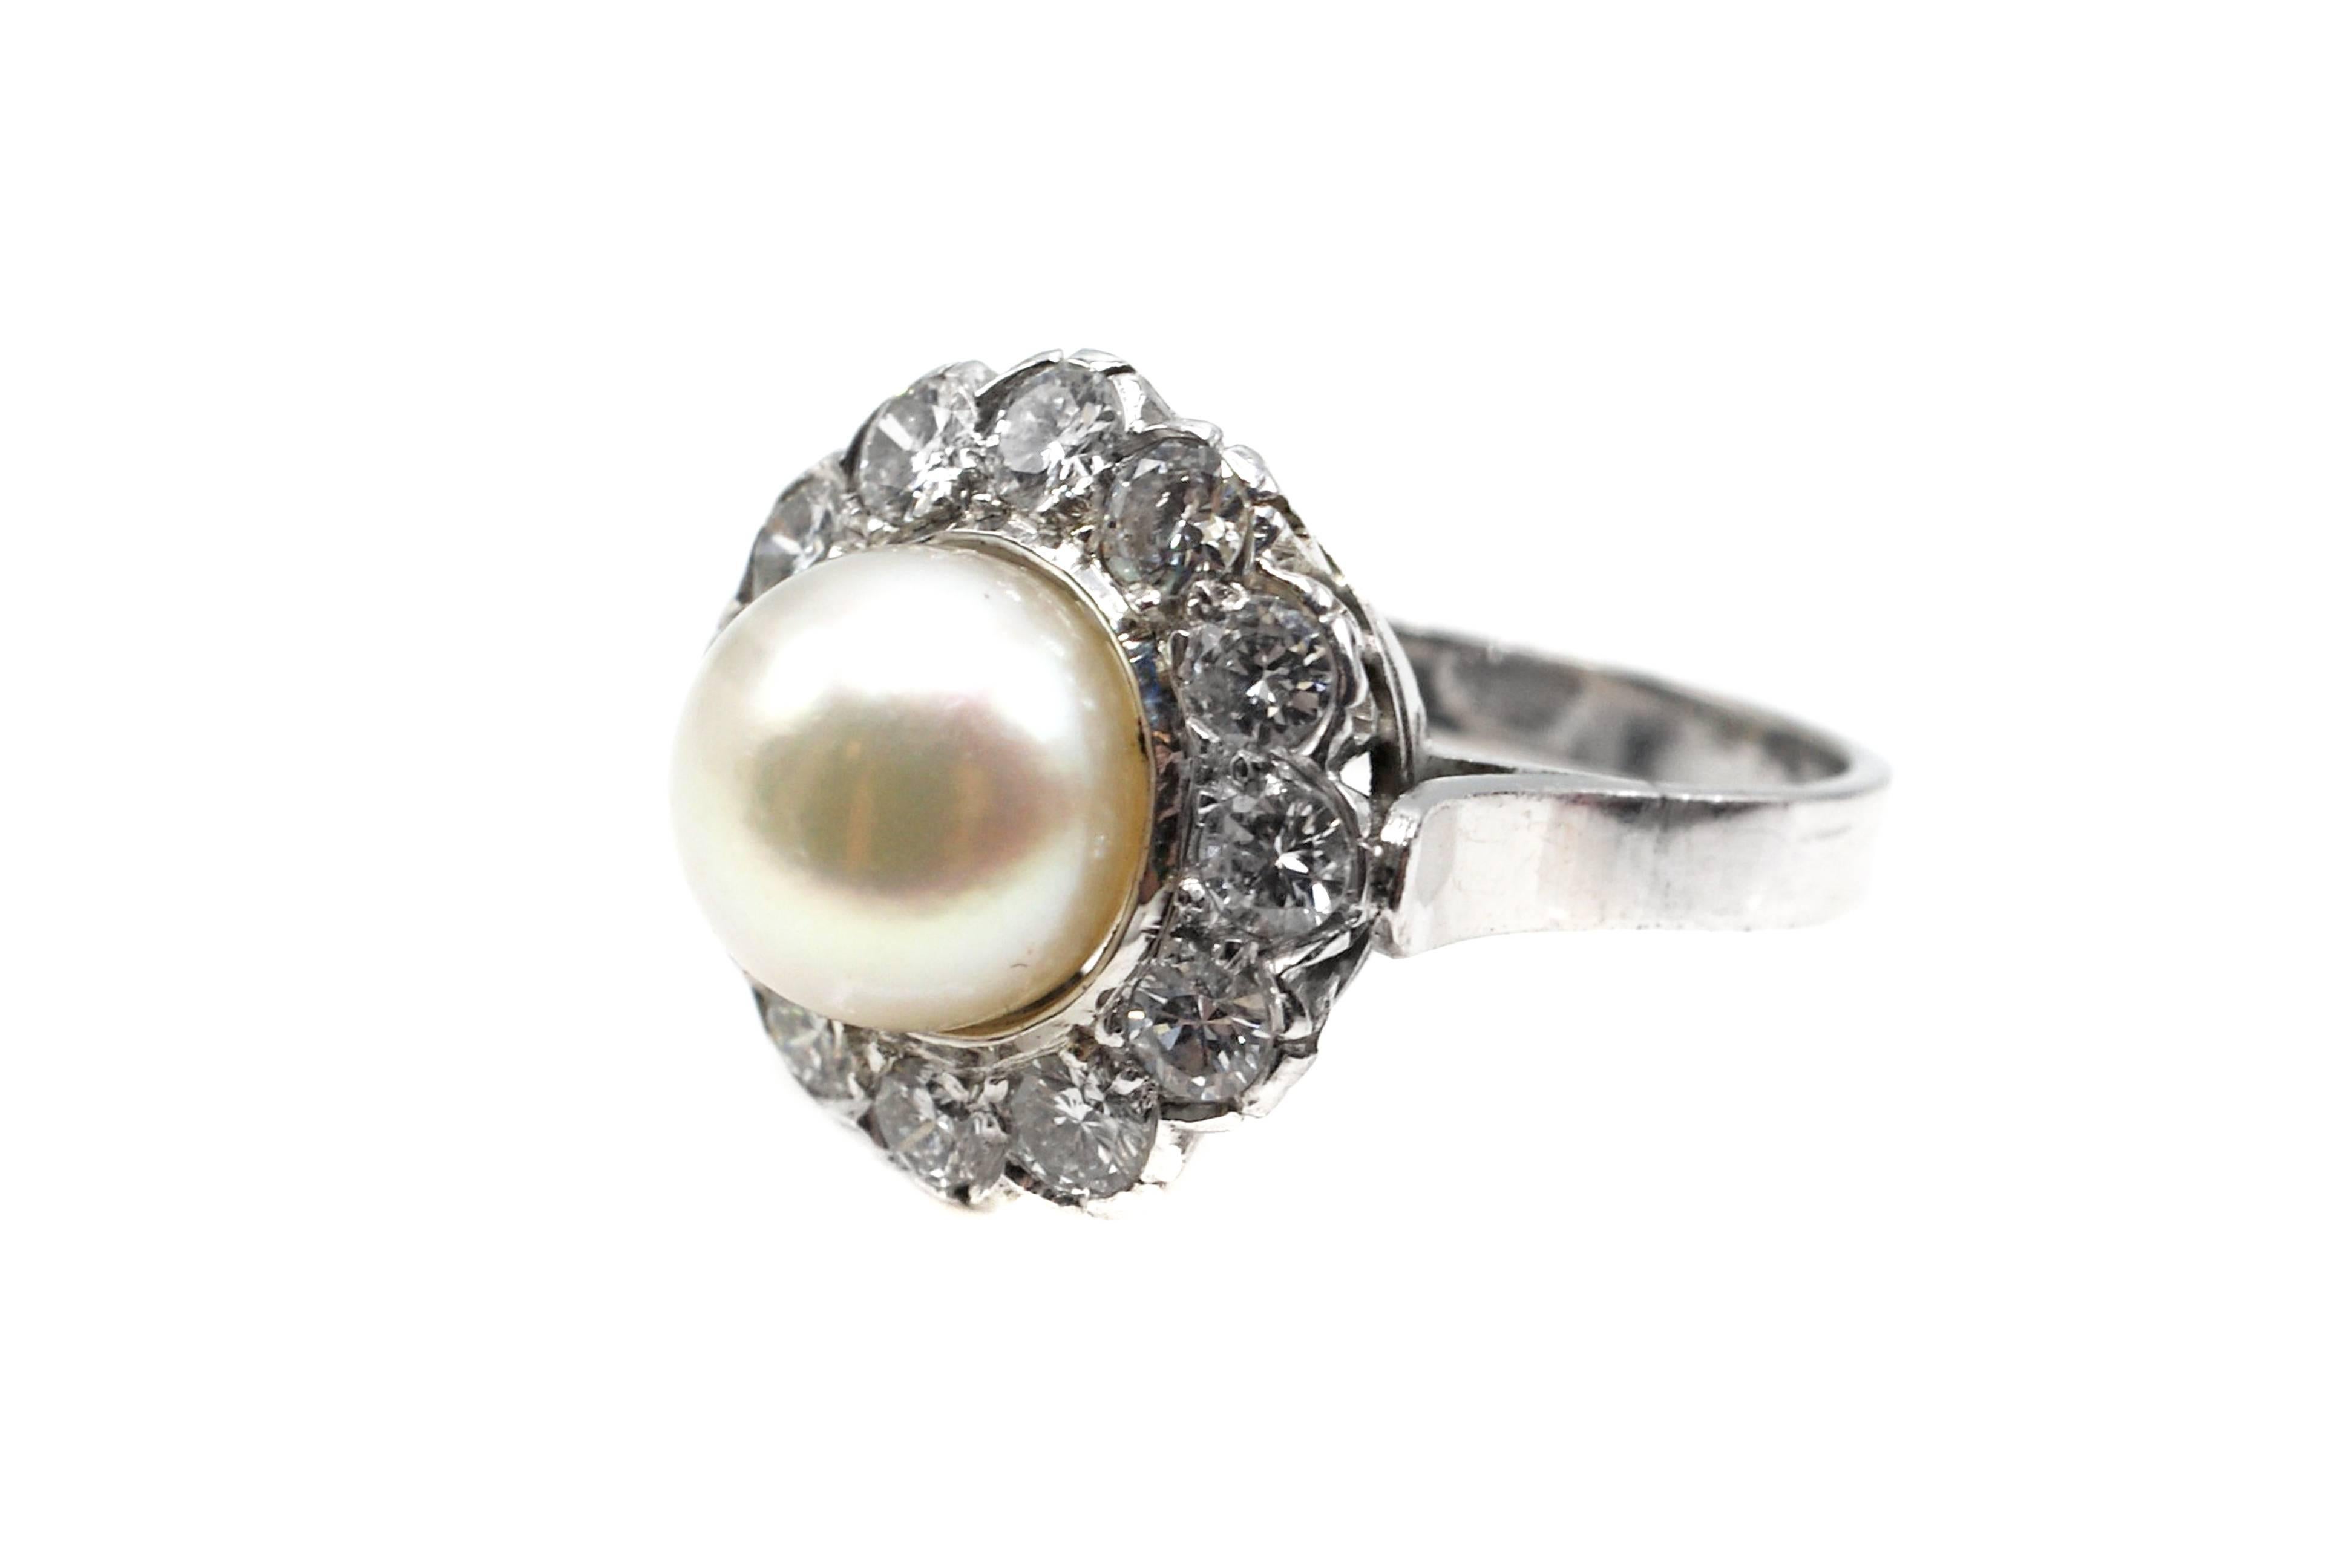 Handcrafted in platinum, this 1960s charming cocktail ring features an 8.25 millimeter lustrous white cultured Akoya pearl. The pearl is embellished by 12 bright weight and sparkly round brilliant cut diamonds weighing approximately 1 carat. The